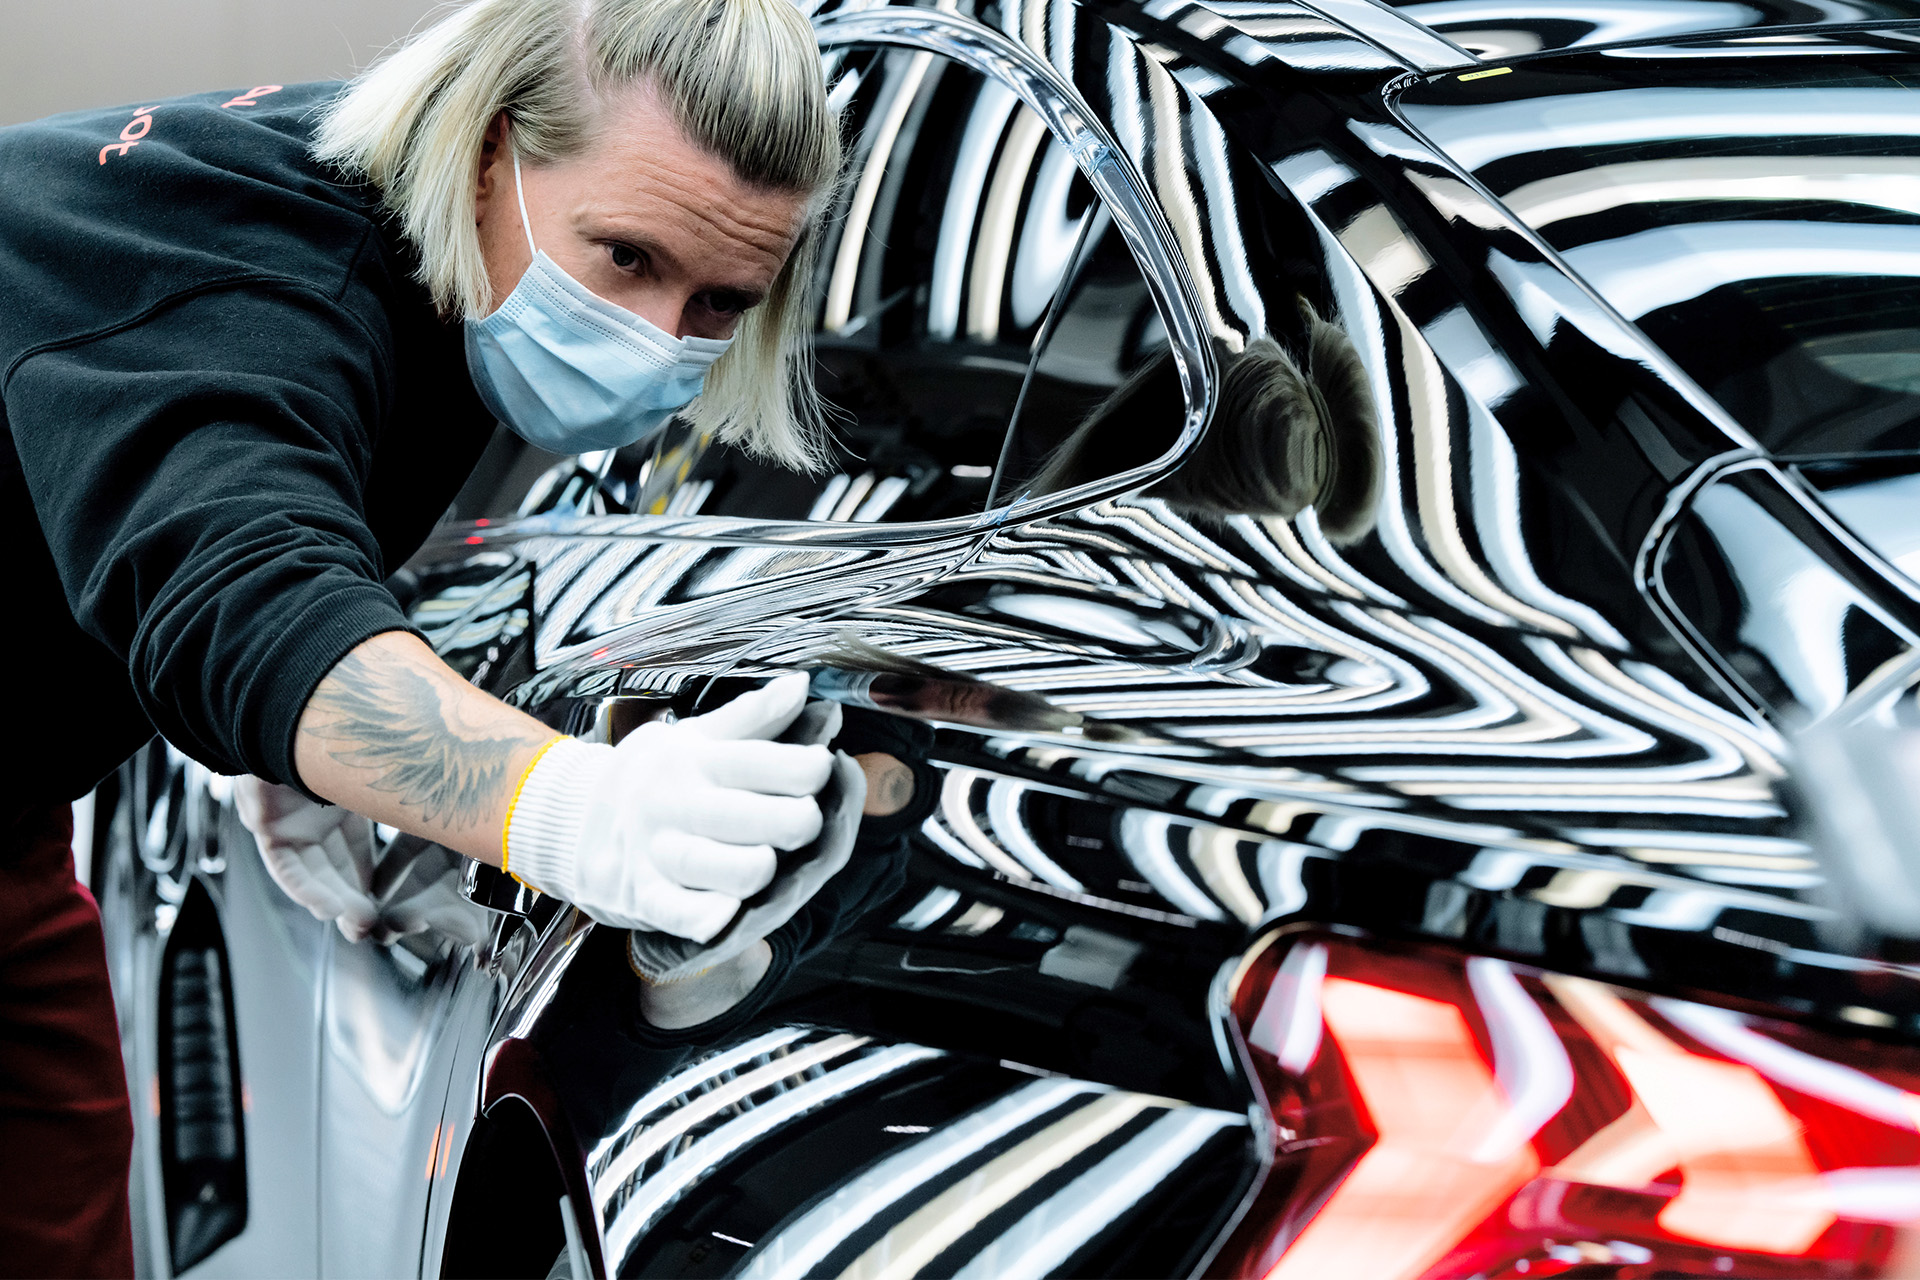 An Audi technician runs a gloved hand along a newly-built Audi e-tron GT, performing the final paintwork quality check.